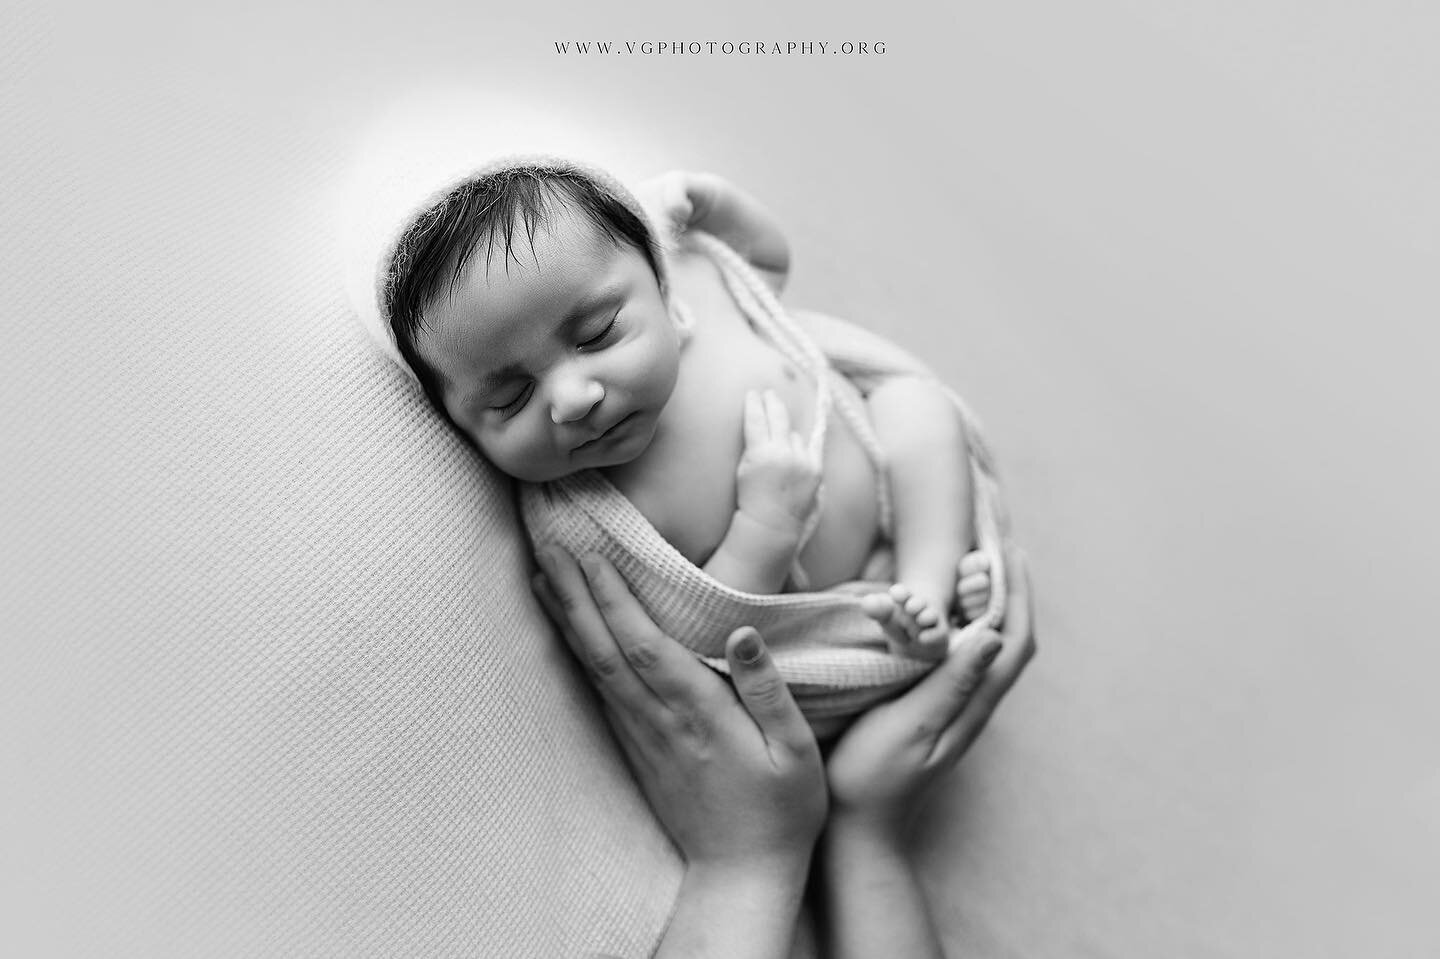 Hold on to the moments&hellip; 🤍

www.vgphotography.org

#photography #newbornsession #baby #photos #iowacityphotographer #iowaphotographer #peoriaphotographer #davenportphotographer #rockfordphotpgrapher #illinoisphotographer #session #photographer